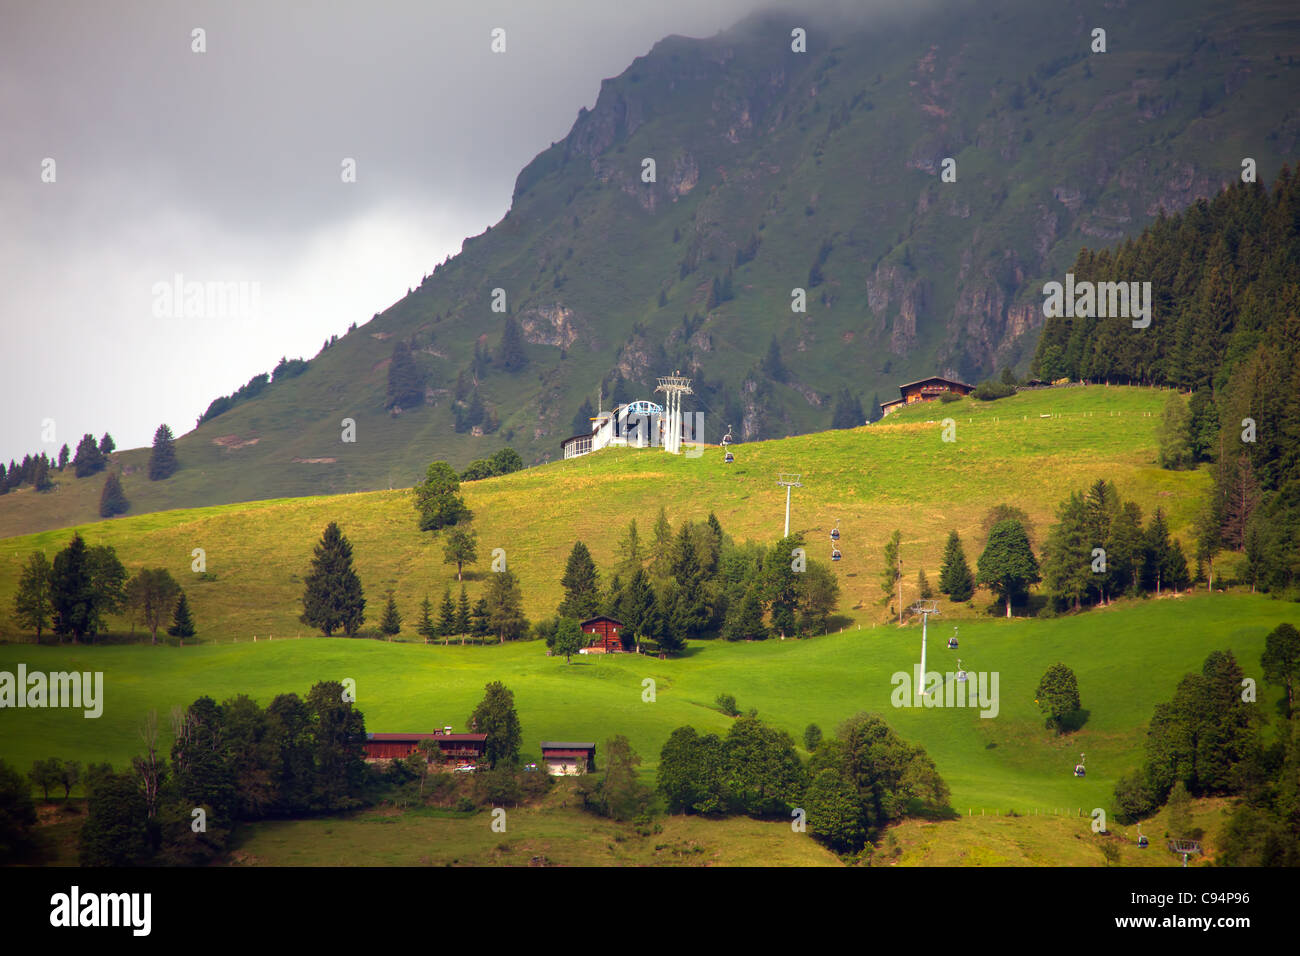 Alps mountains in Tirol Austria.Summertime with operating ski lifts. Stock Photo